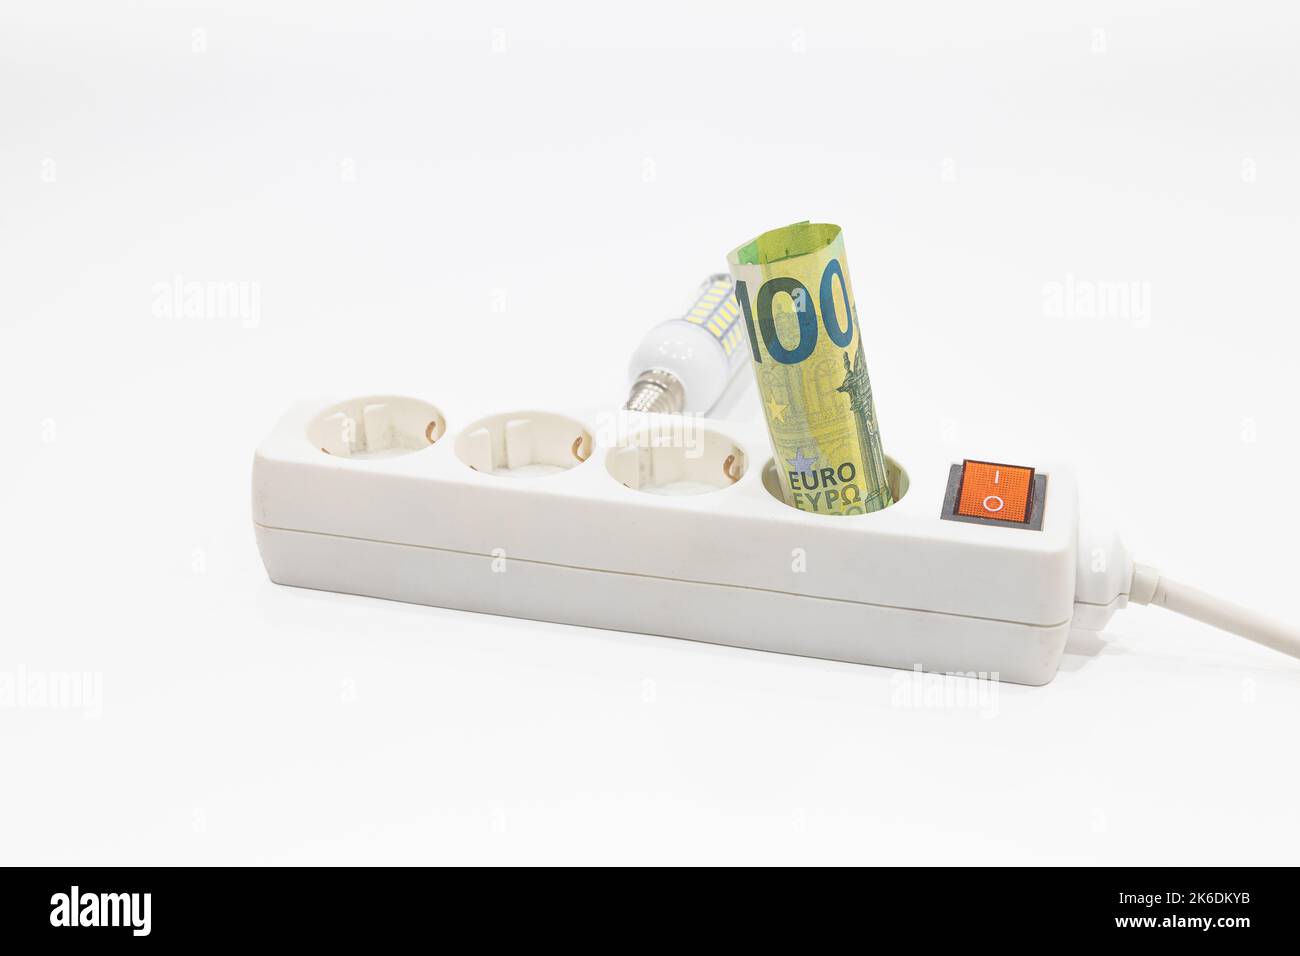 Euro banknotes are stuck in an electric power strip. Concept of the increasing electricity prices Stock Photo